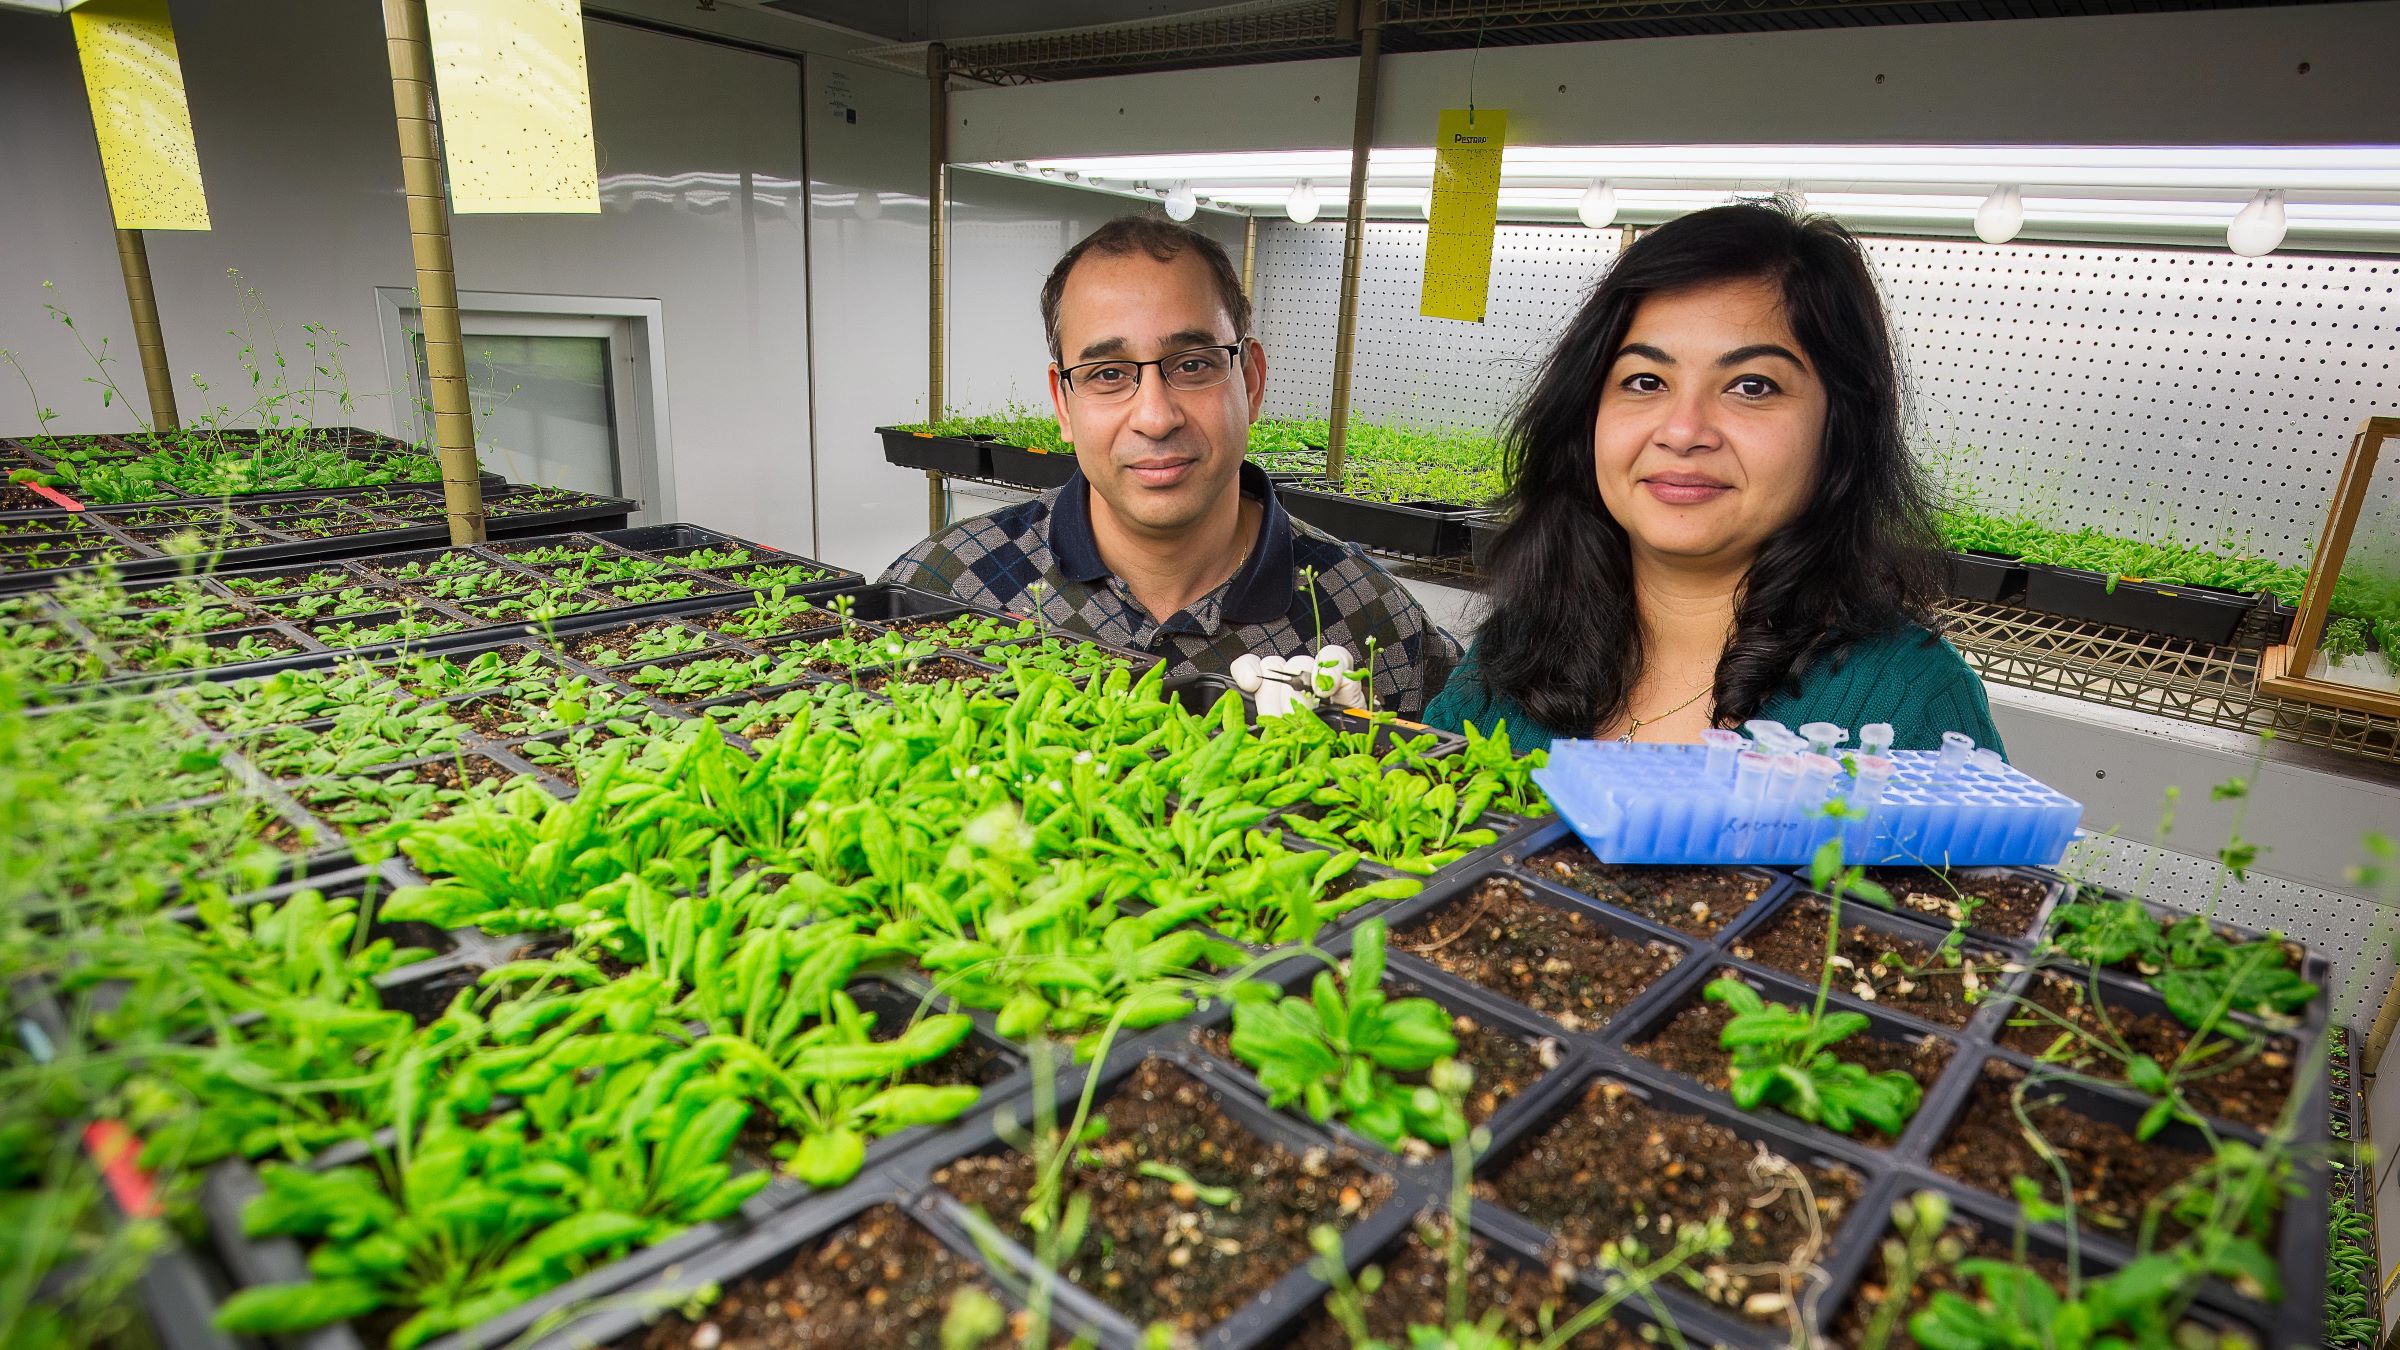 Pradeep Kachroo, joined by and Aardra Kachroo, study plant responses to microbial pathogens in the UK Department of Plant Pathology lab. Photo by Matt Barton.